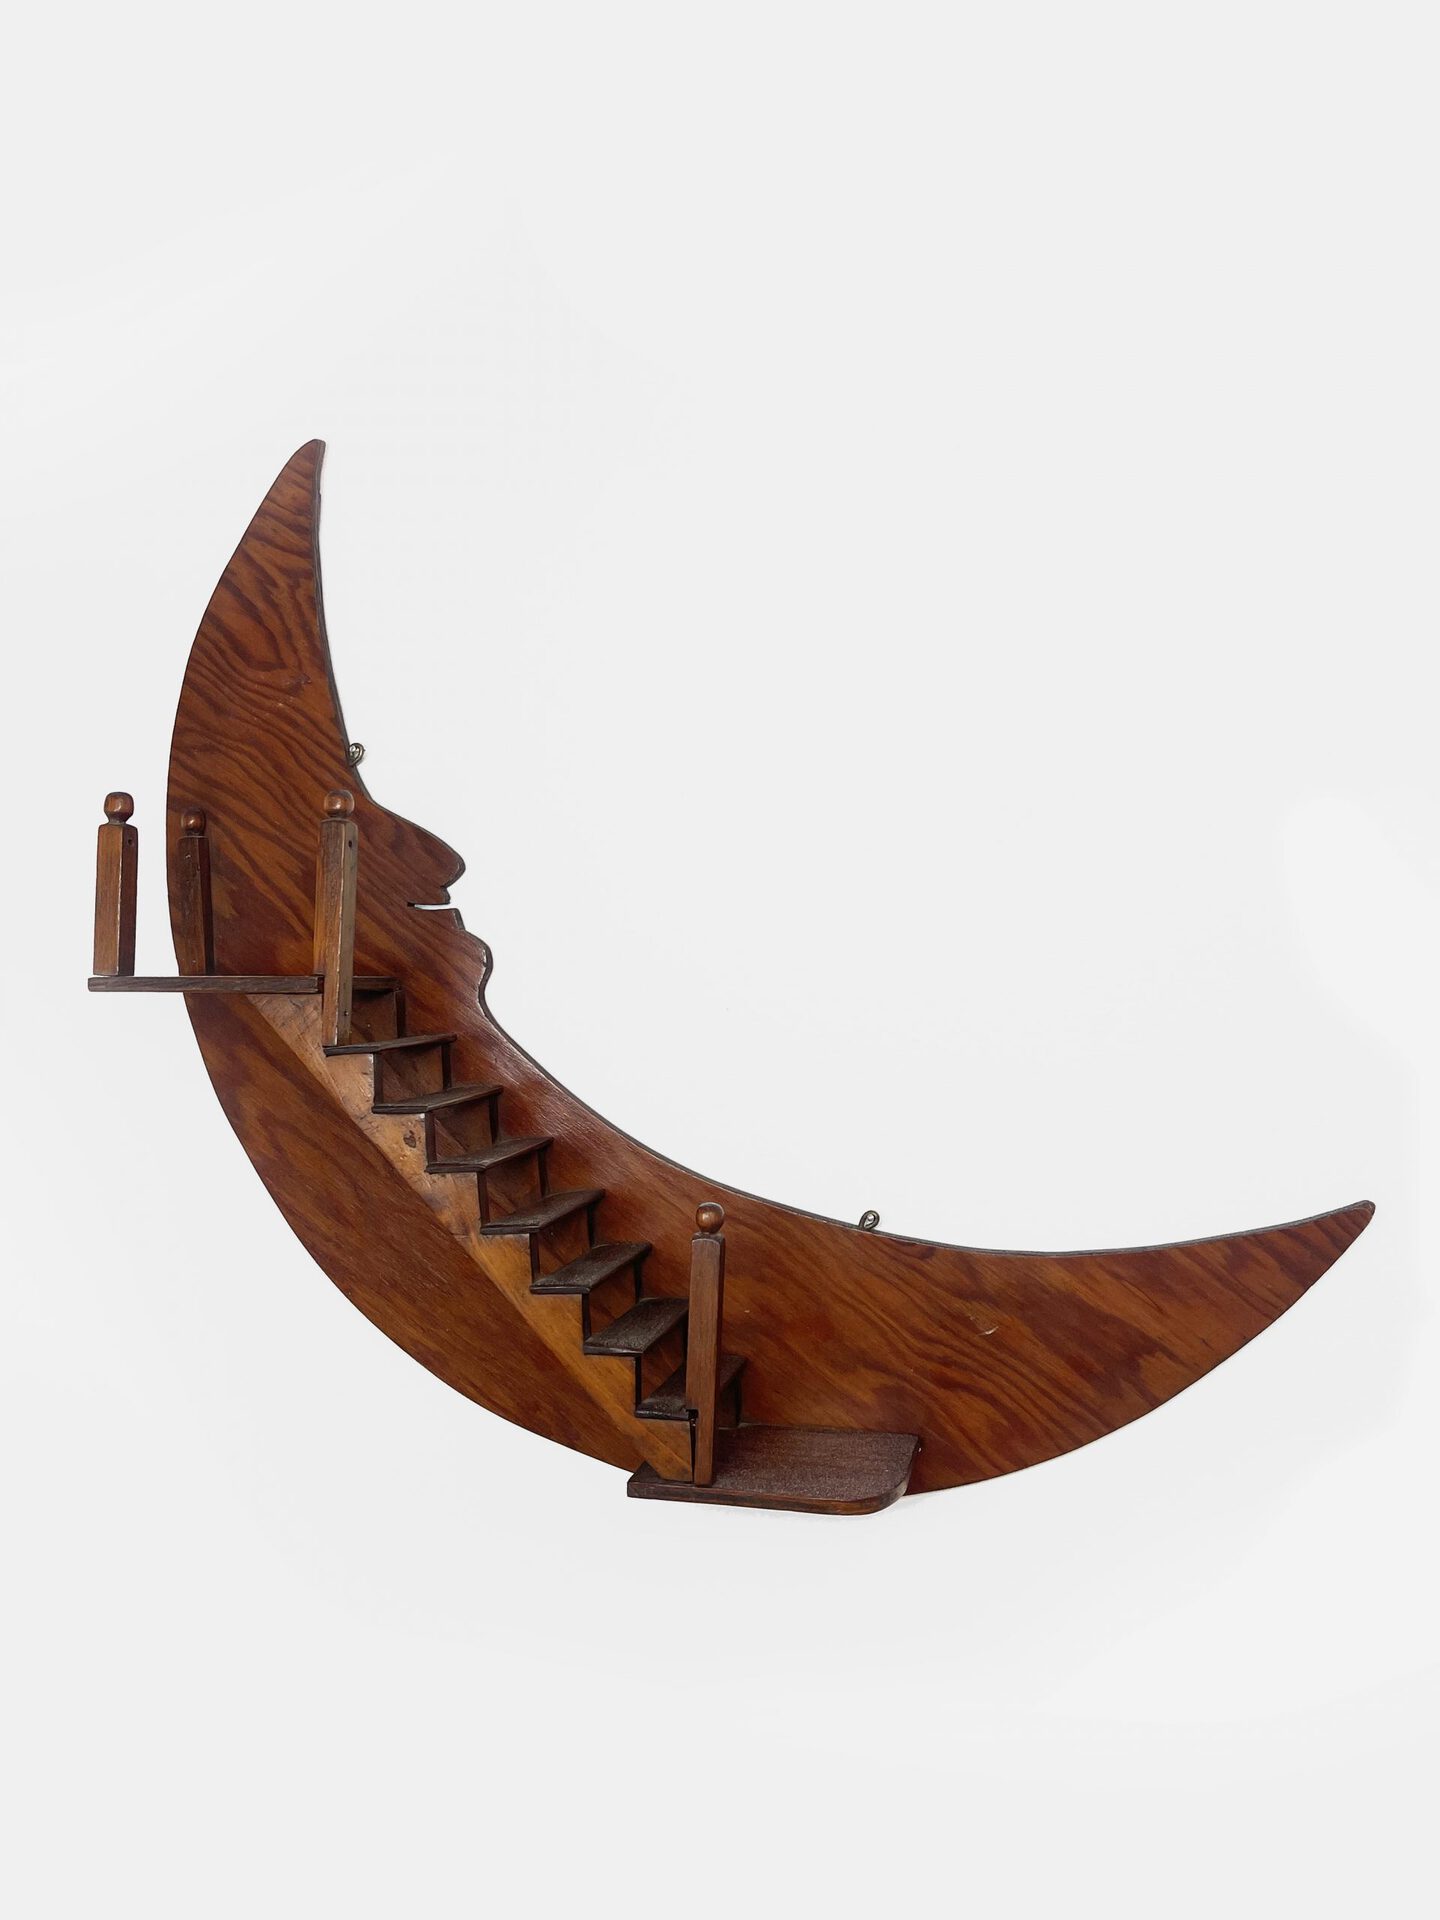 Victoria Todorov, Untitled (Moonshine), 2022, wooden hobby crescent shelf (American Provenance), 55 x 15 x 10 cm